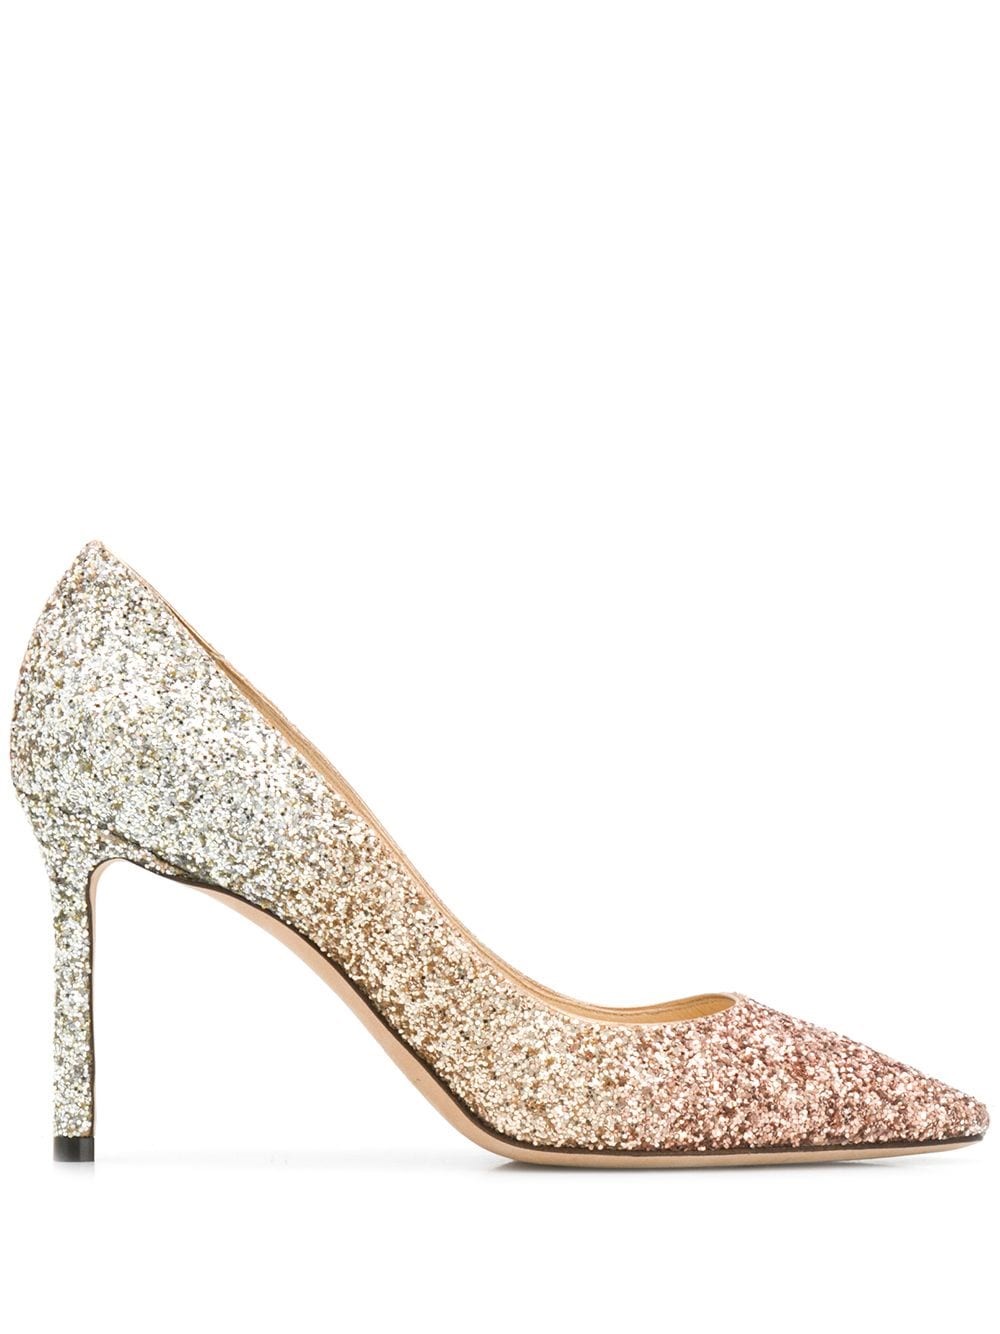 jimmy choo sequin shoes